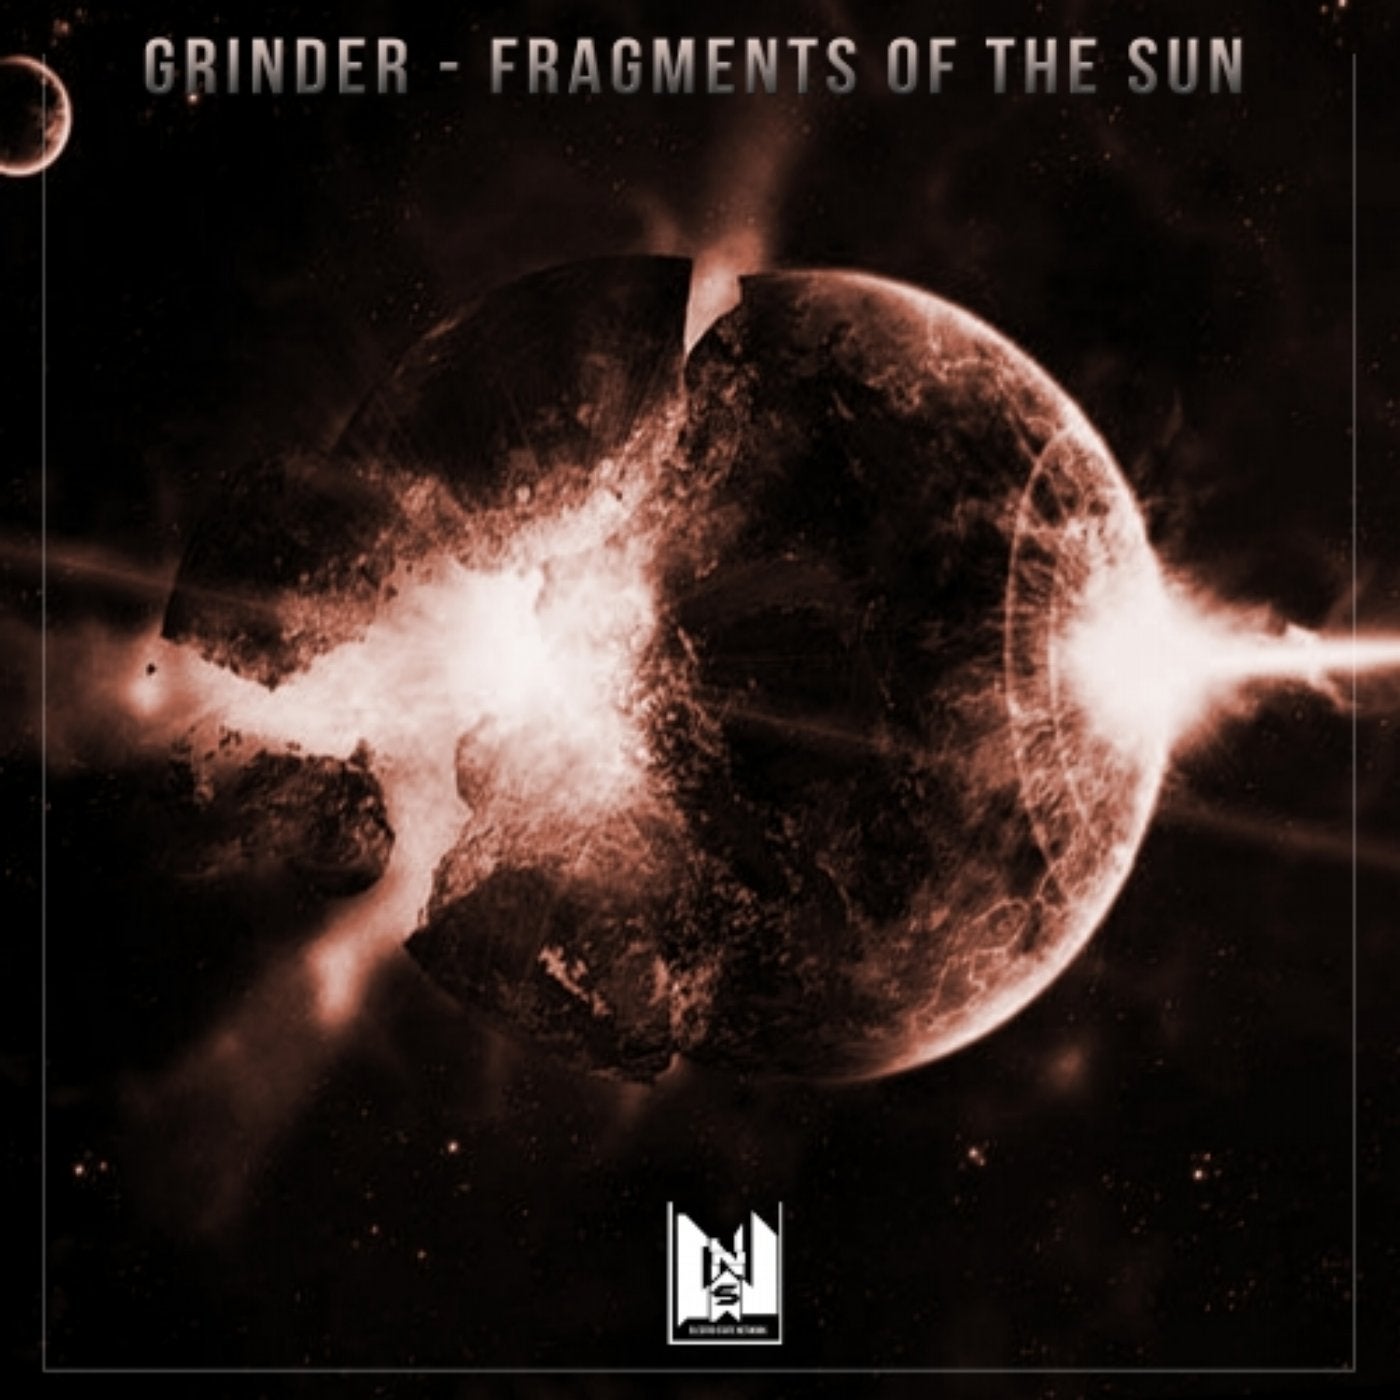 Fragments of the Sun